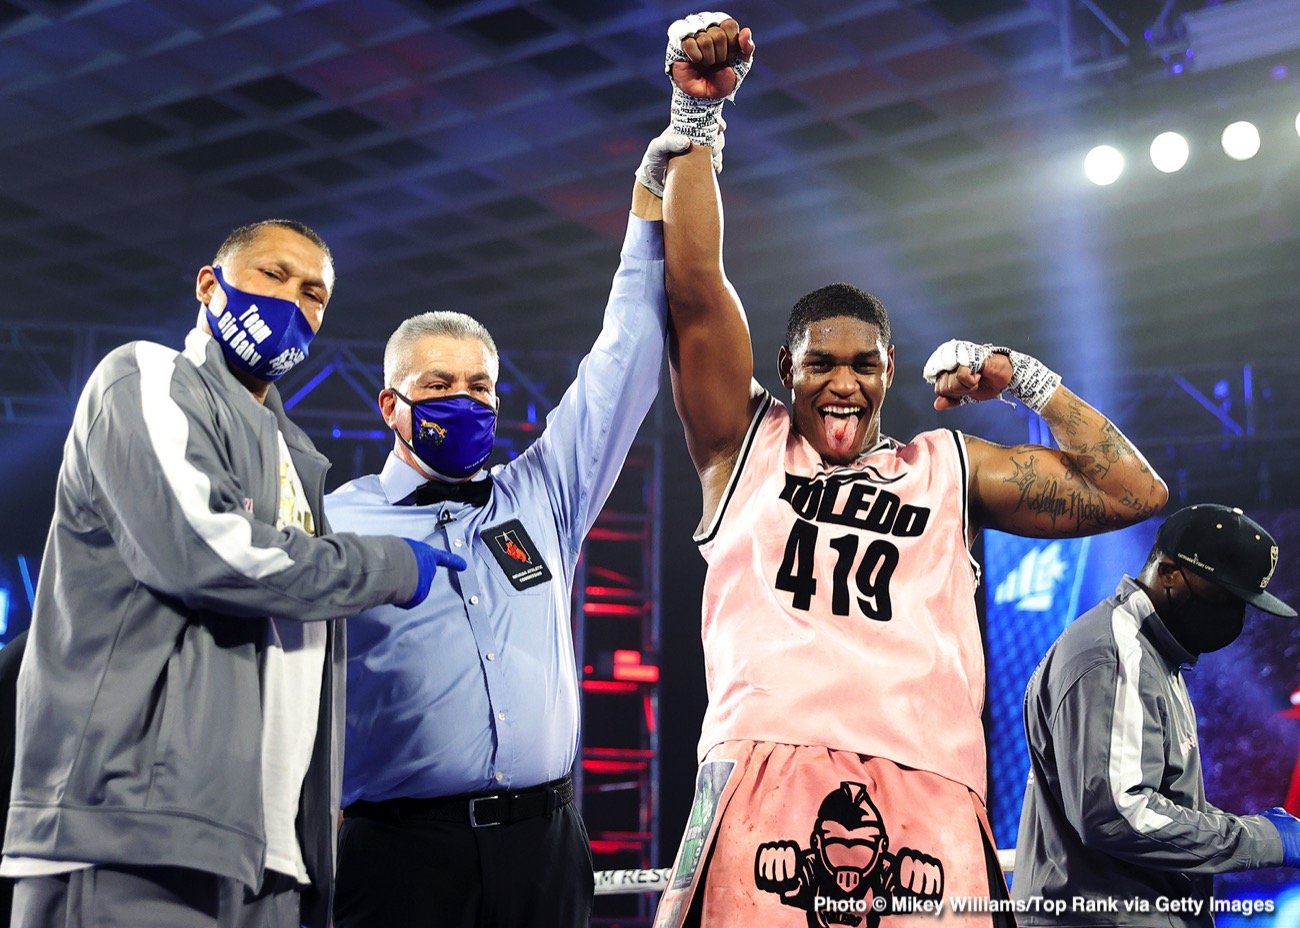 Image: Boxing Results: Richard Commey and Adam Lopez victorious 